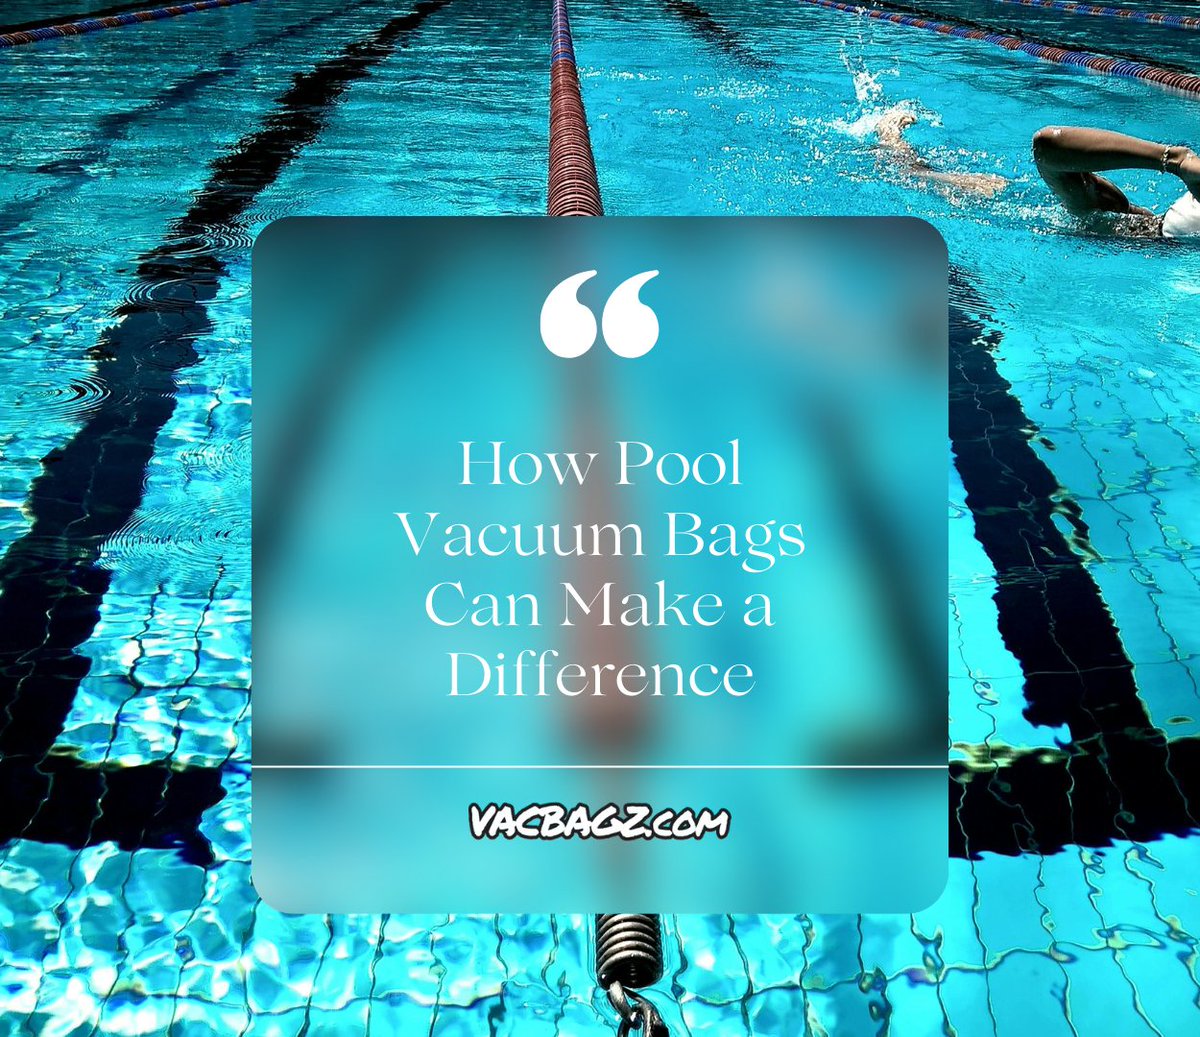 Say goodbye to constant cleaning and hello to more time enjoying your sparkling pool! Check out our Swimming pool vacuum bags at vacbagz.com #vacbagz #swimming #swimmingpool #vacuum #vacuumbags #vacbagzdebrisbags #cleaning #makingdifference